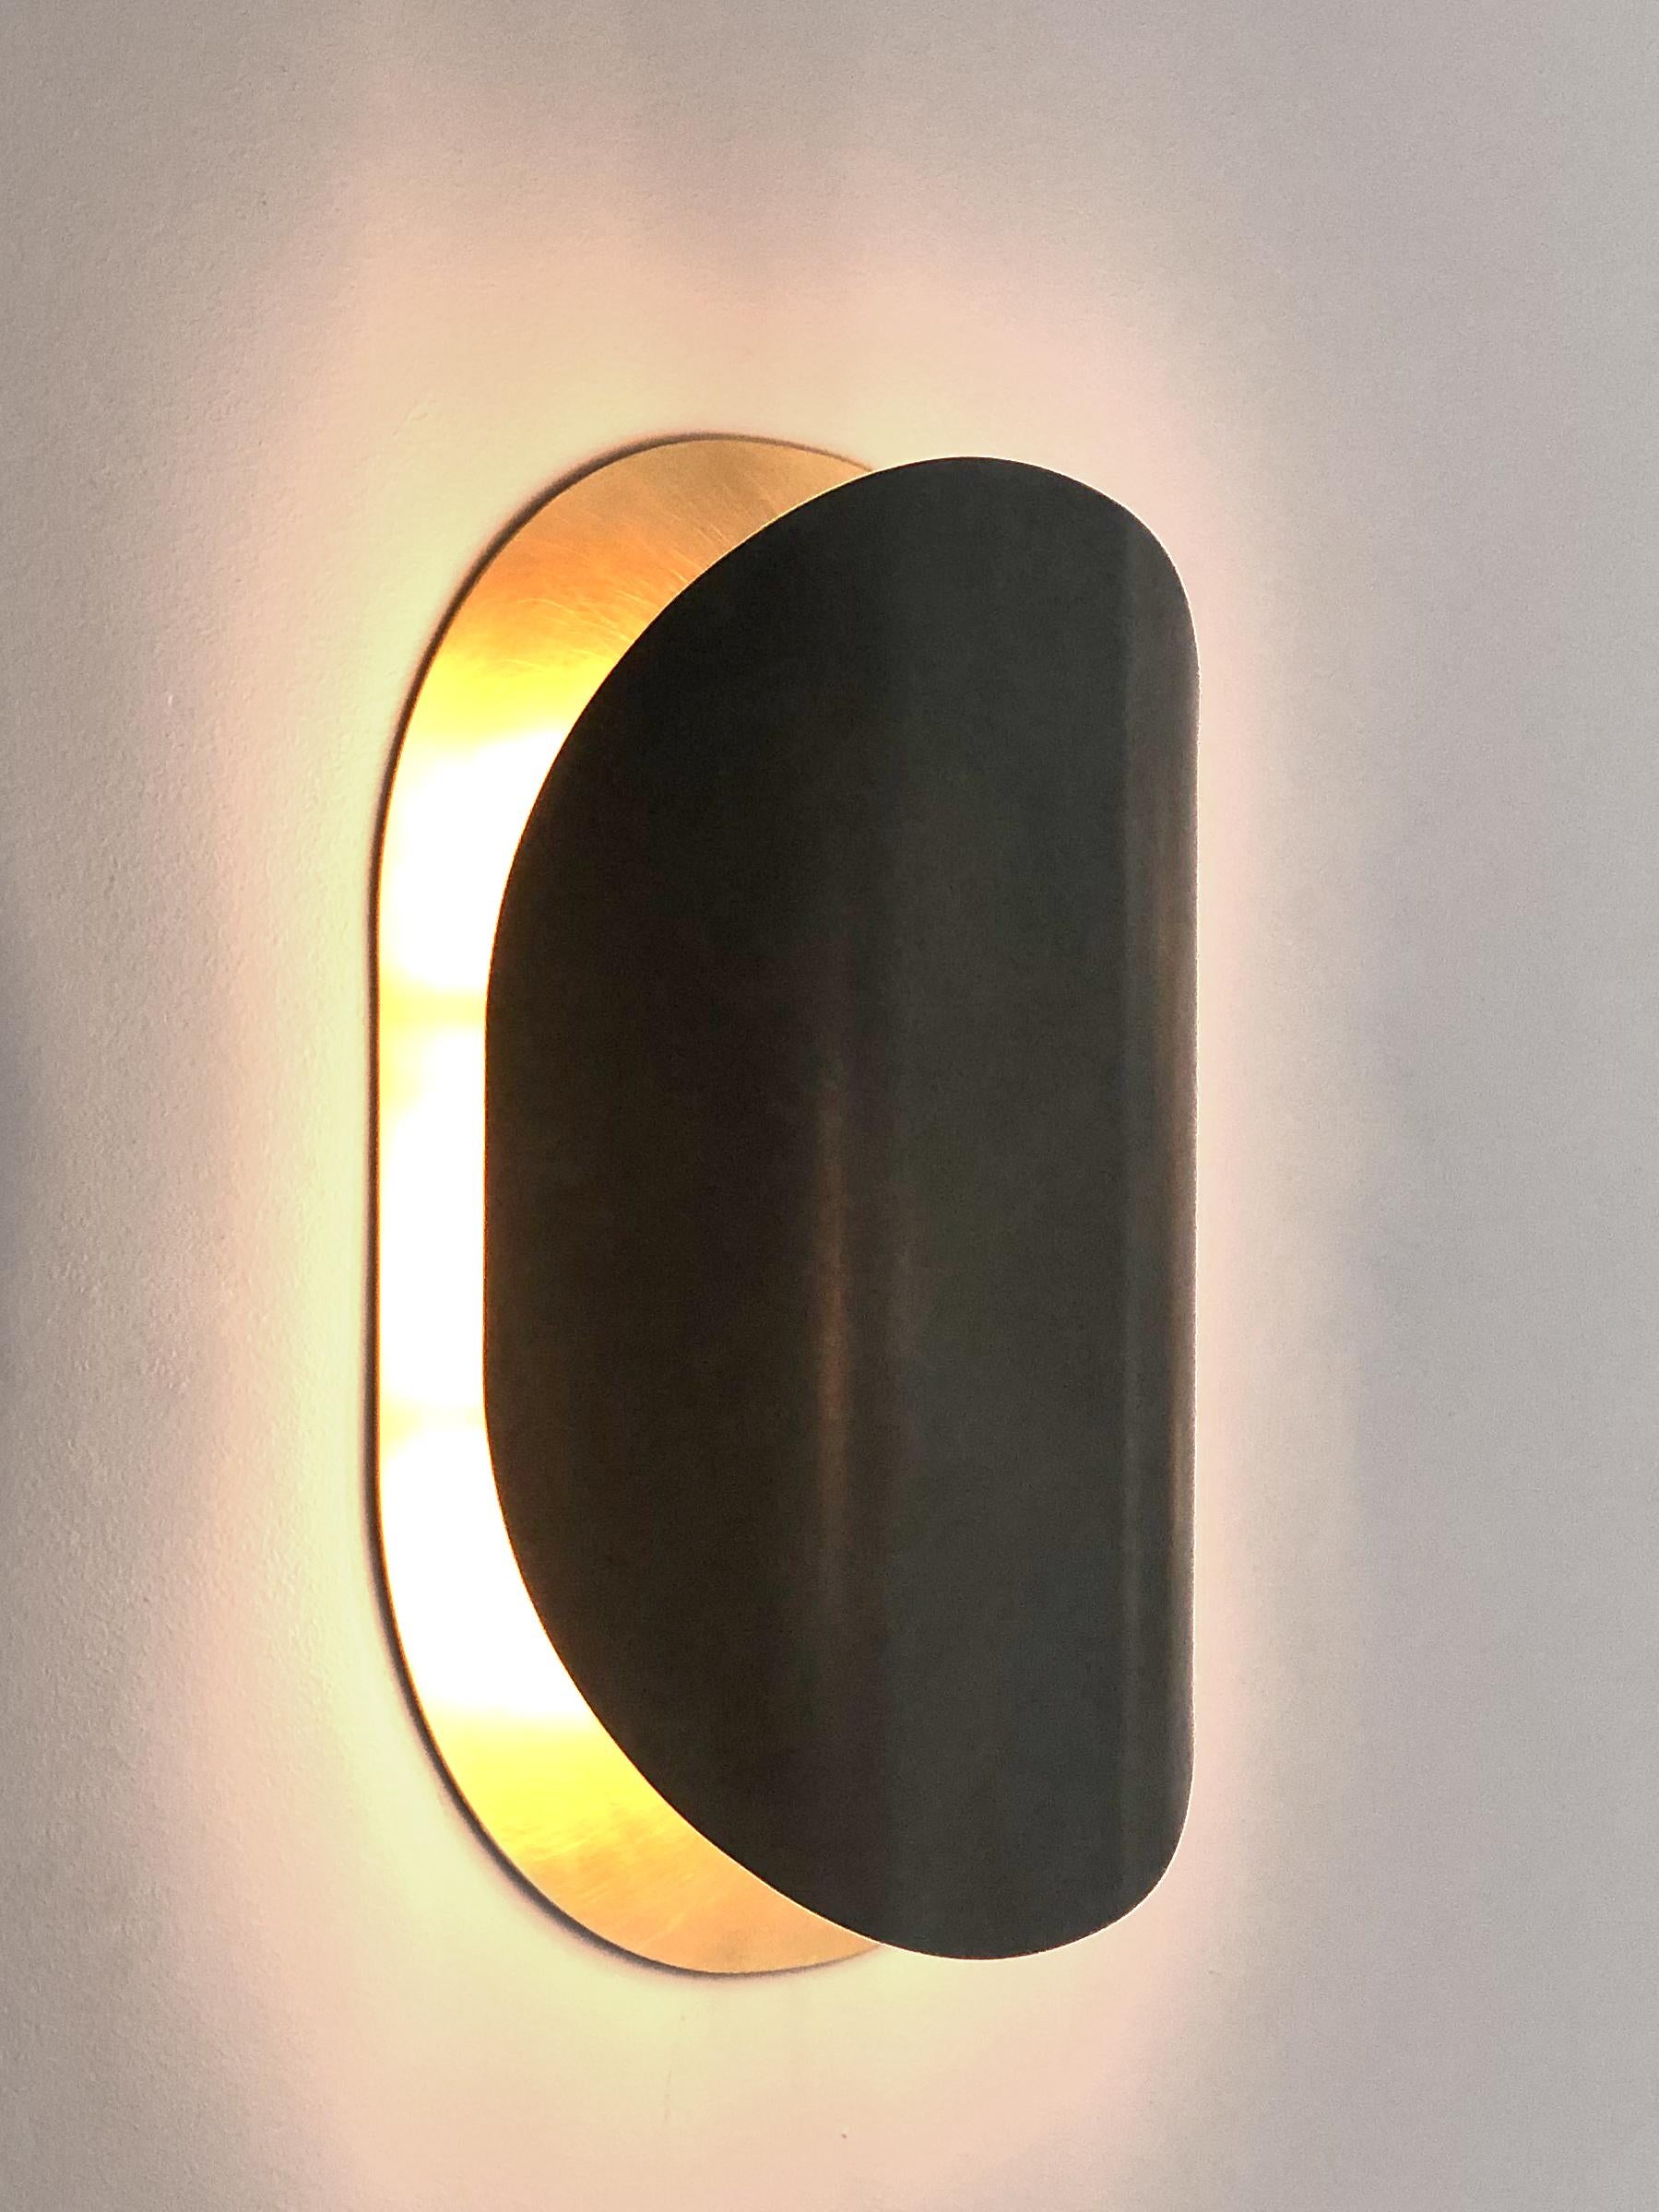 Astra wall light is presented by Victoria Magniant for Galerie V

The new Astra wall lamp evokes the light effects of an eclipse. Patina work is applied to the exterior of the wall-light to provide an effect of contrast. The invisible assembly